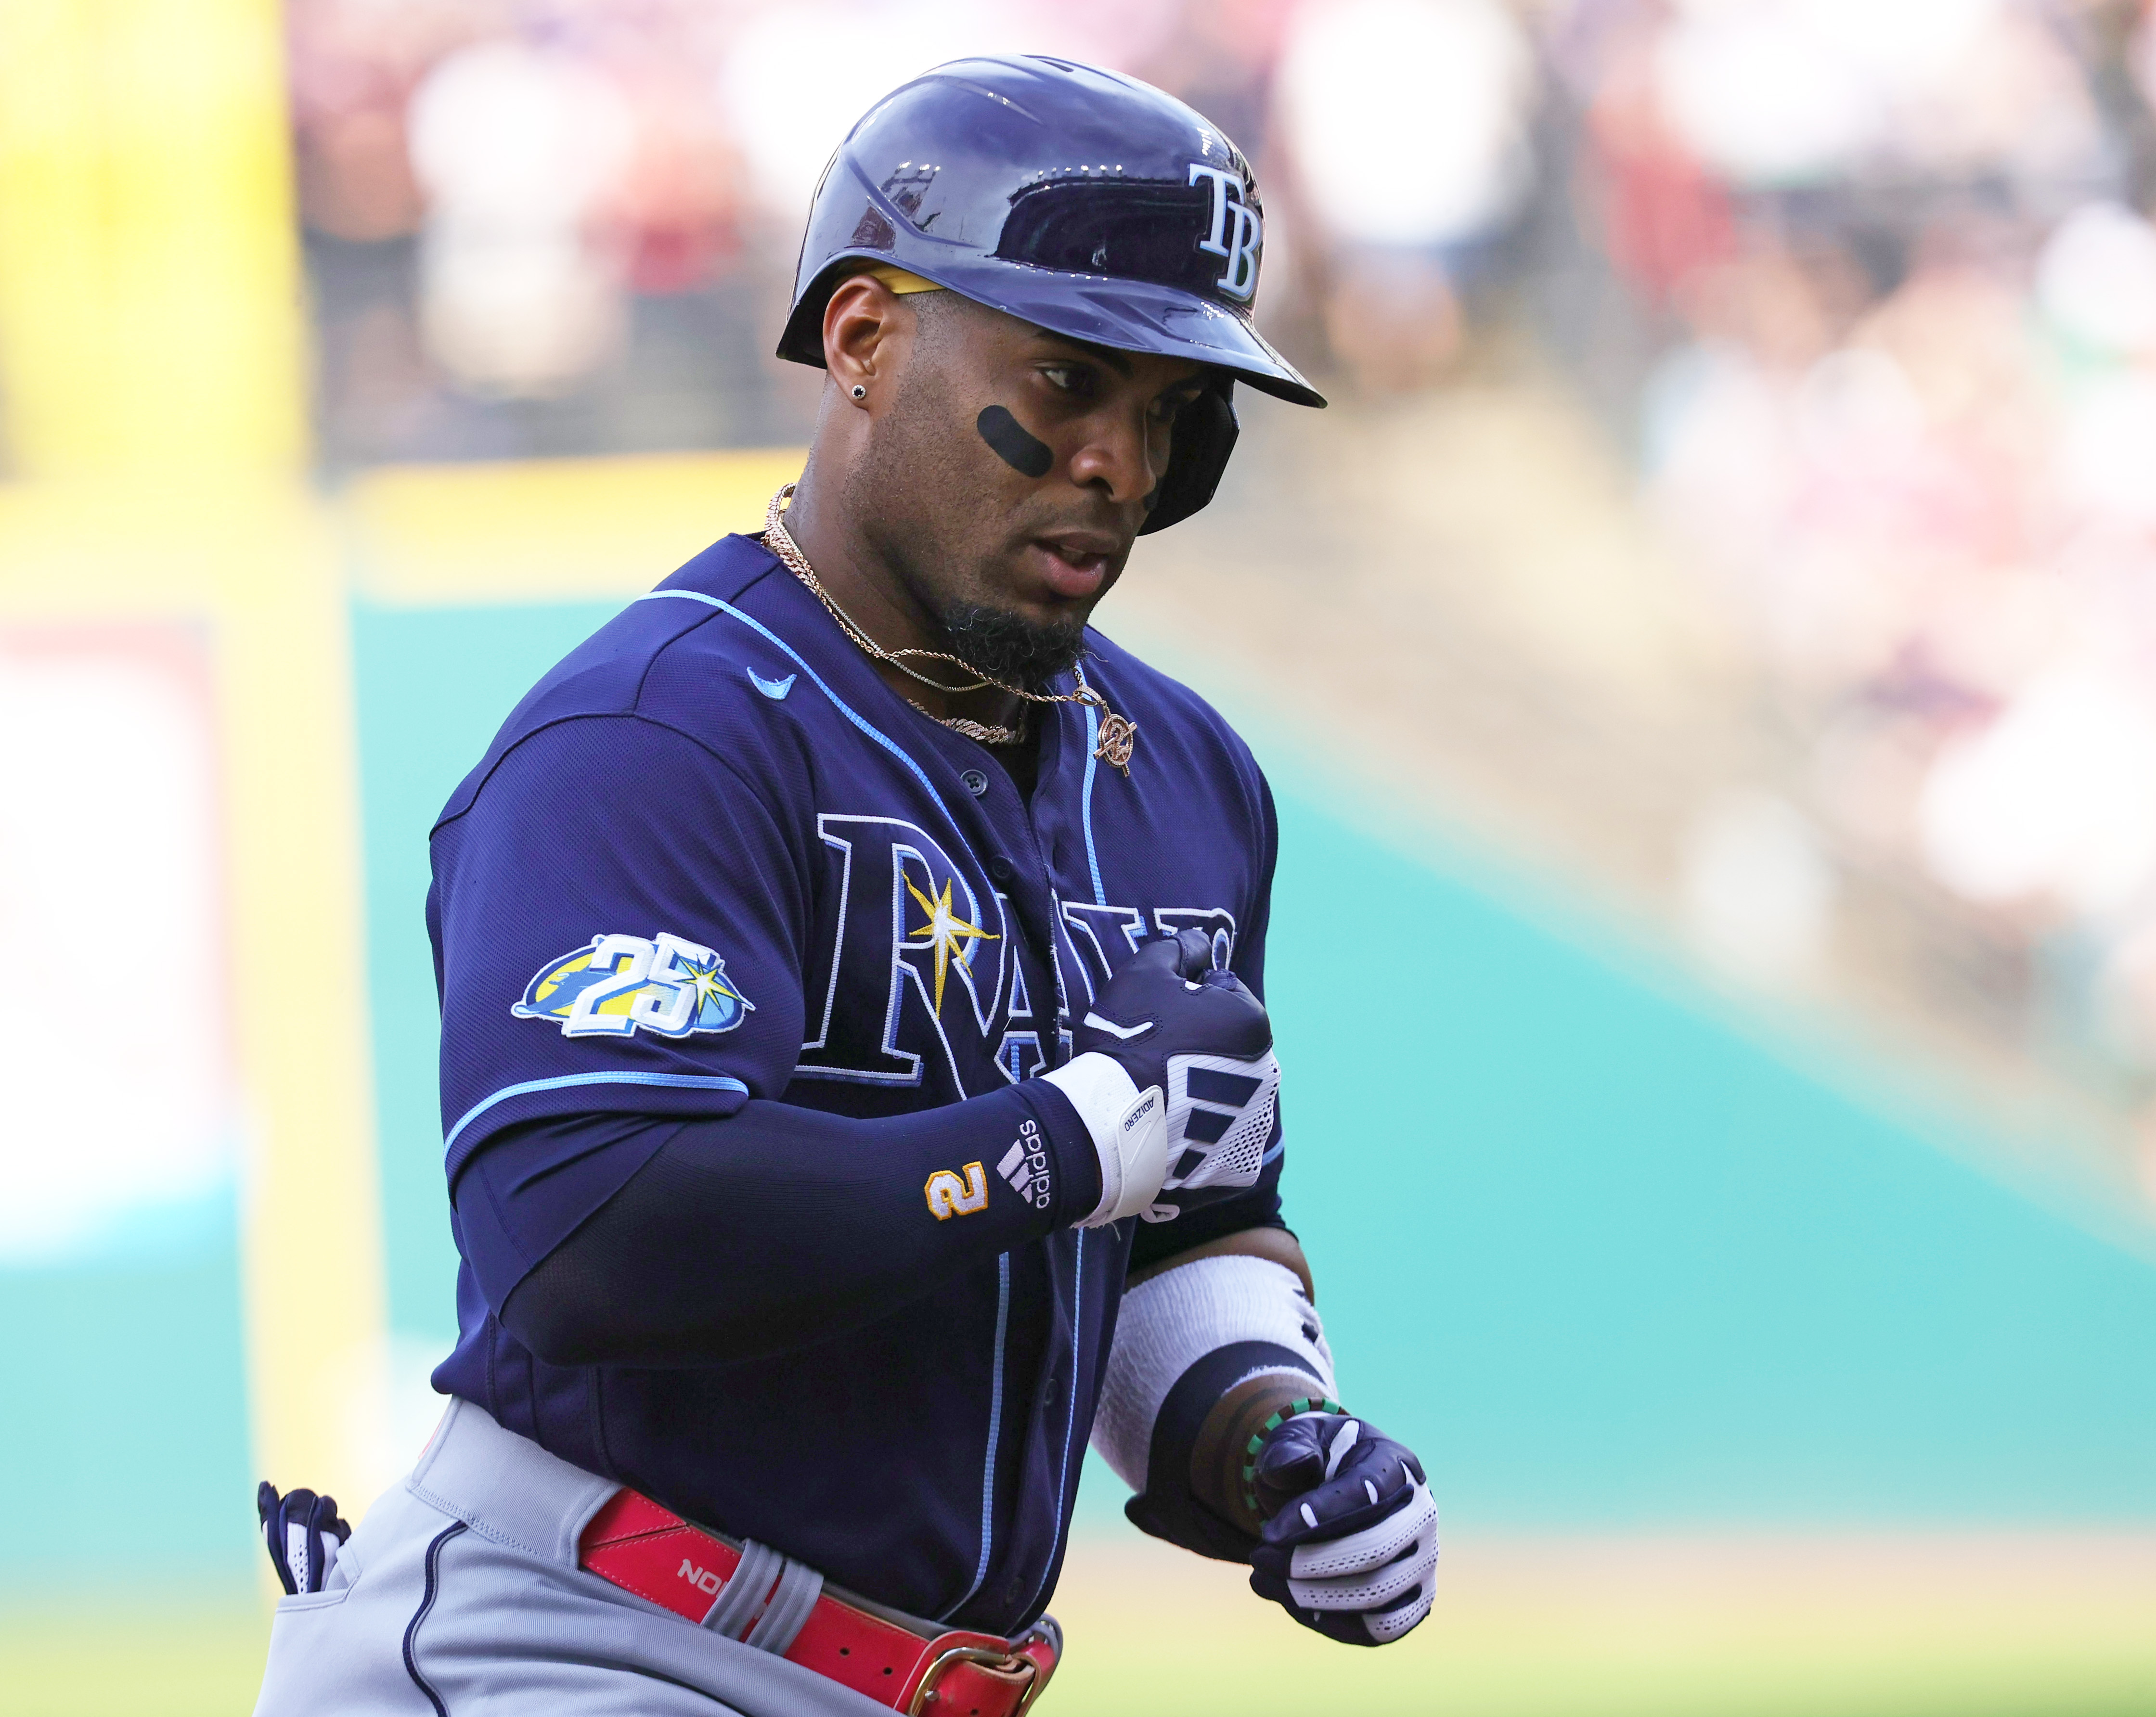 Tampa Bay Rays first baseman Yandy Diaz rounds the bases after a solo homer in the first inning